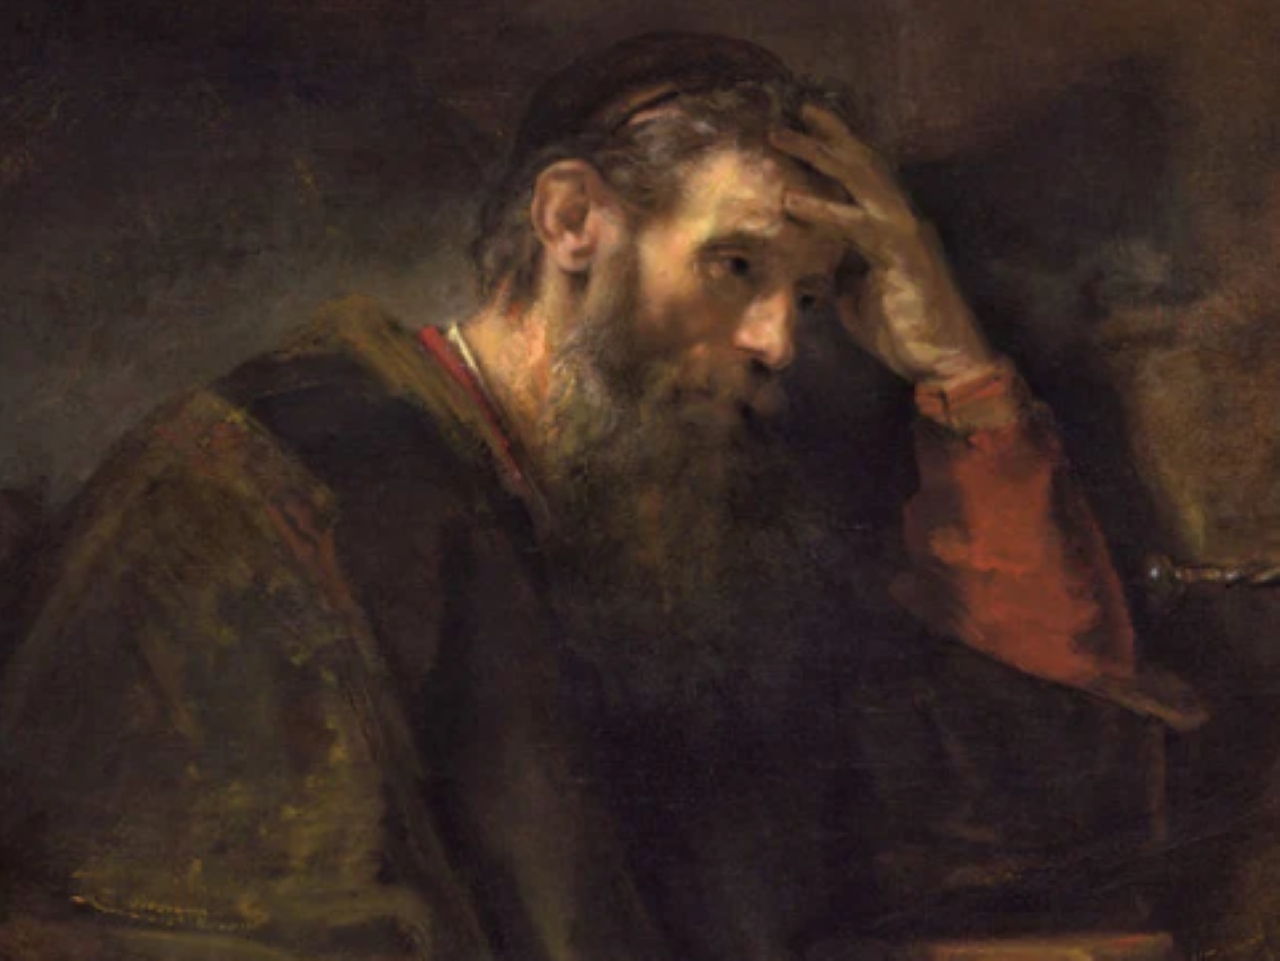 The Apostle Paul by Rembrandt